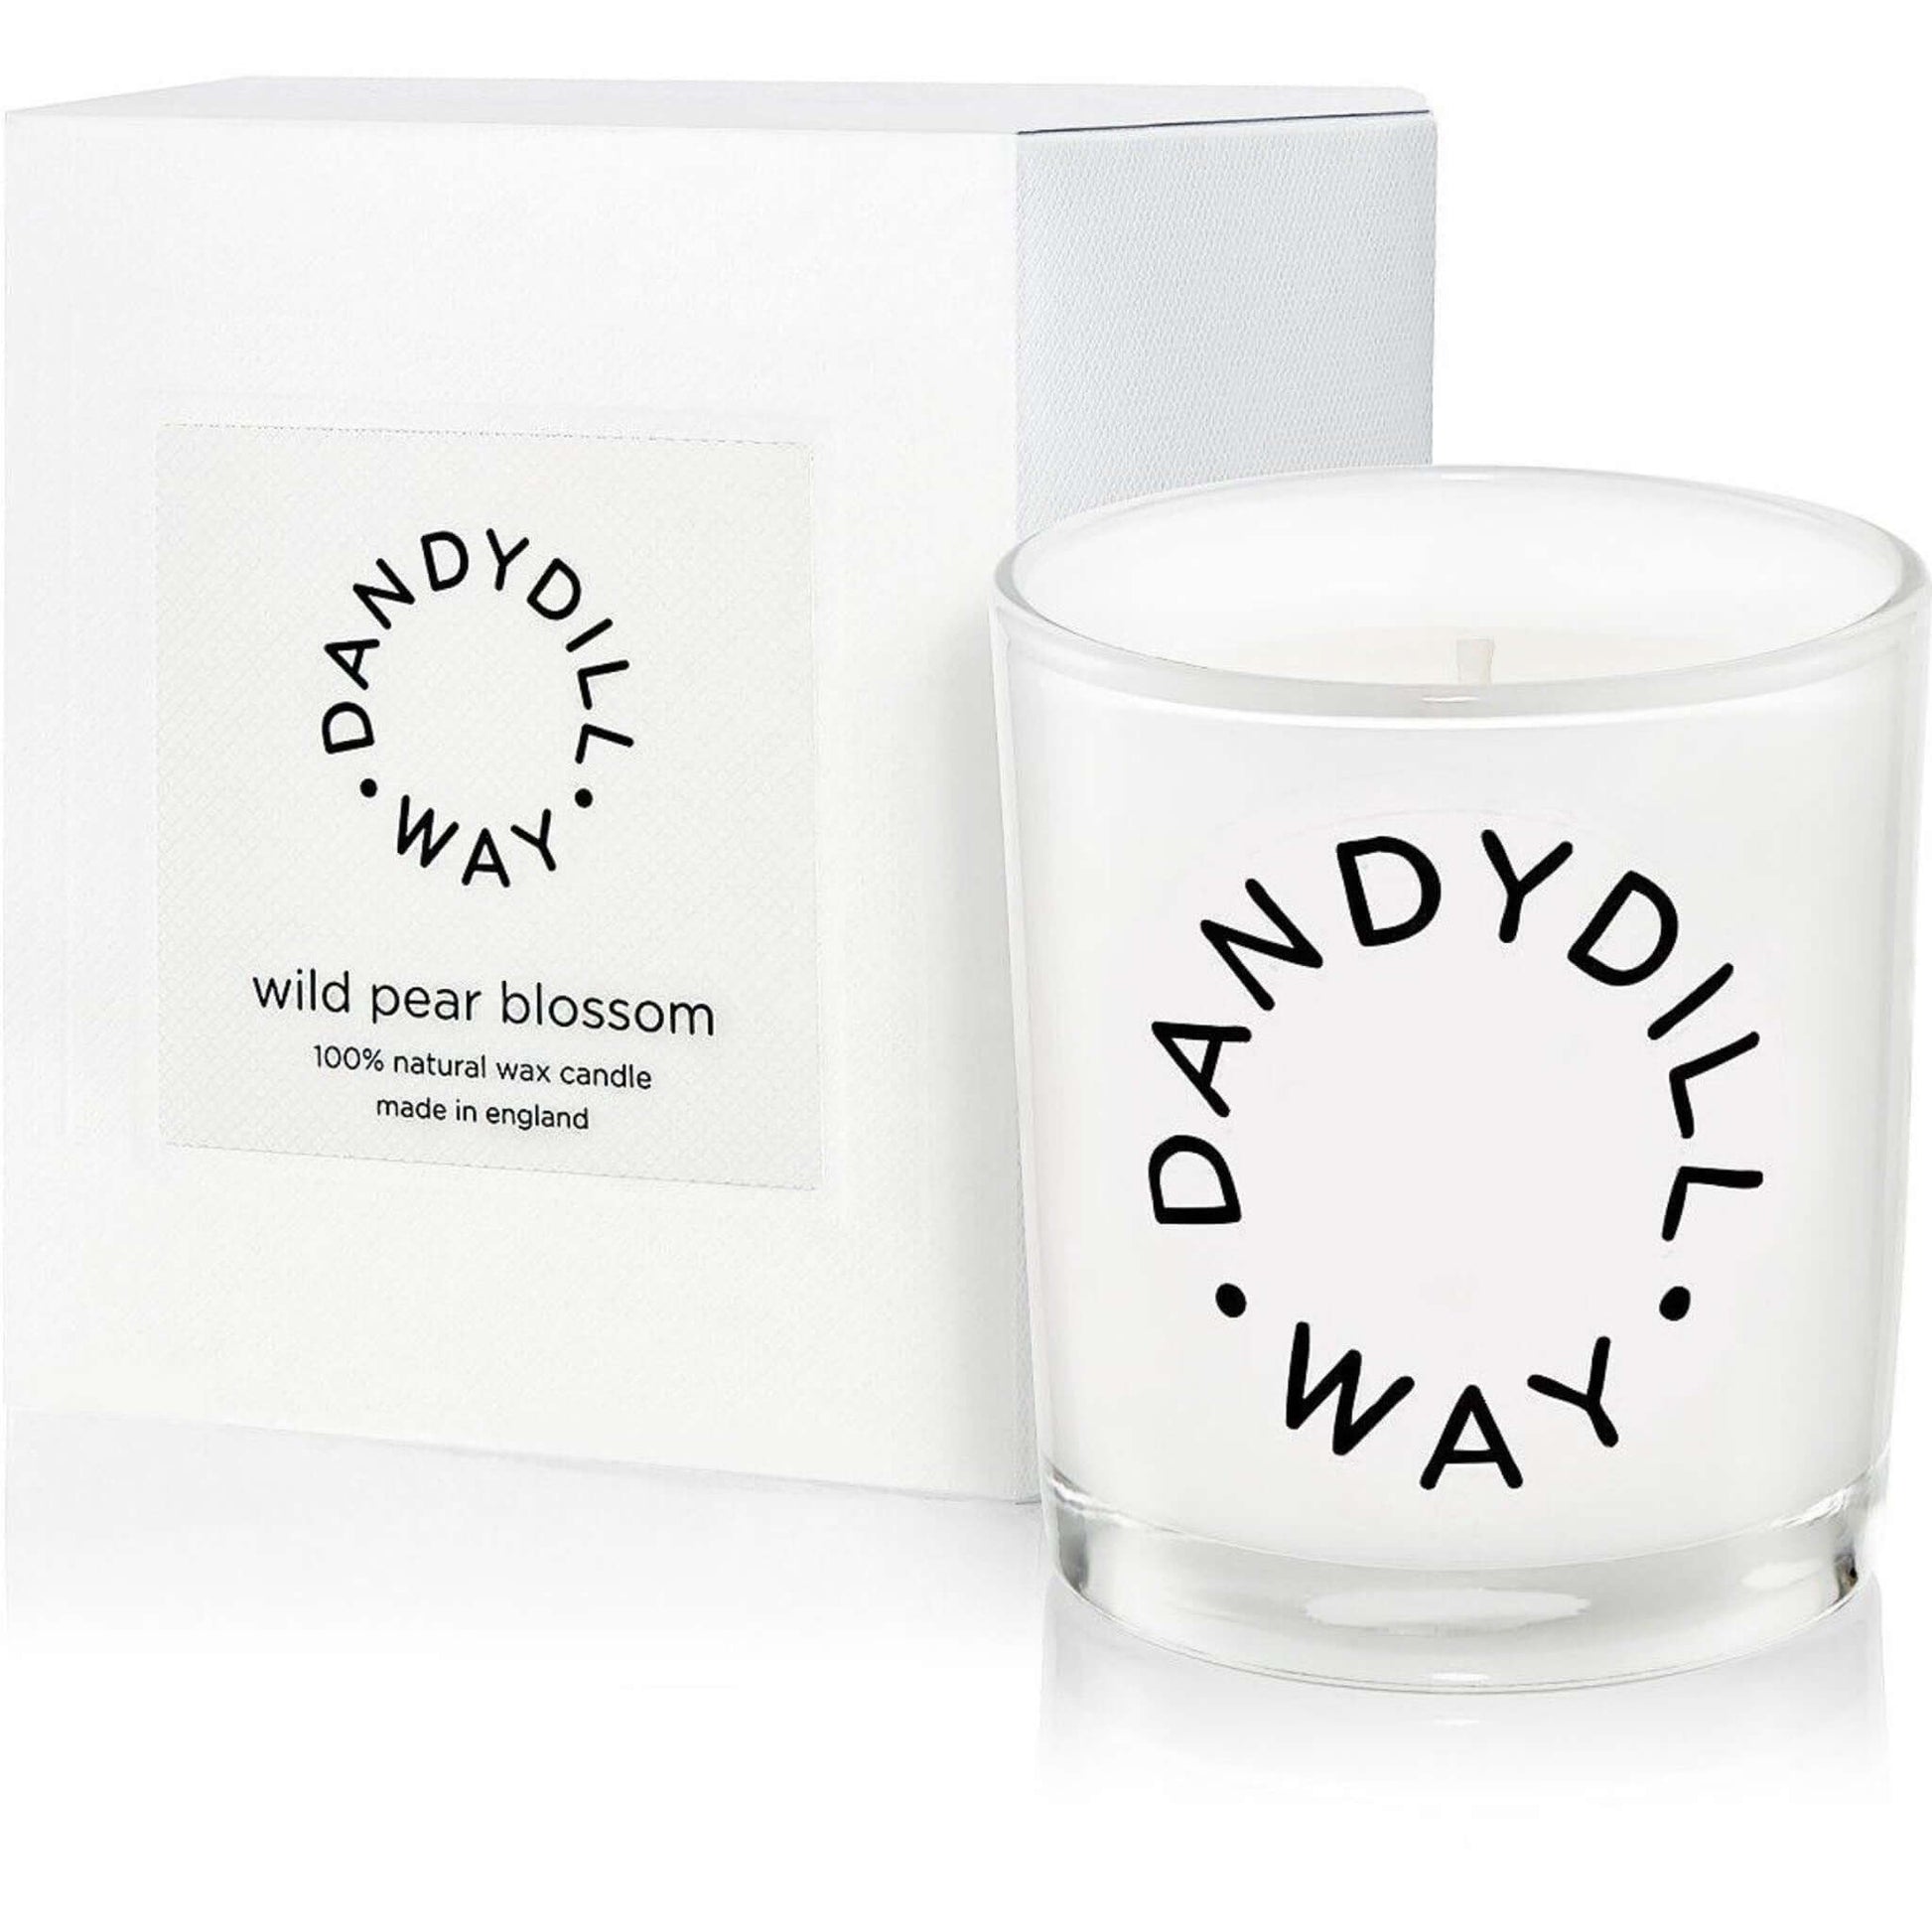 Wild Pear Blossom Room Candle , glass container and white branded box from Dandydill Way